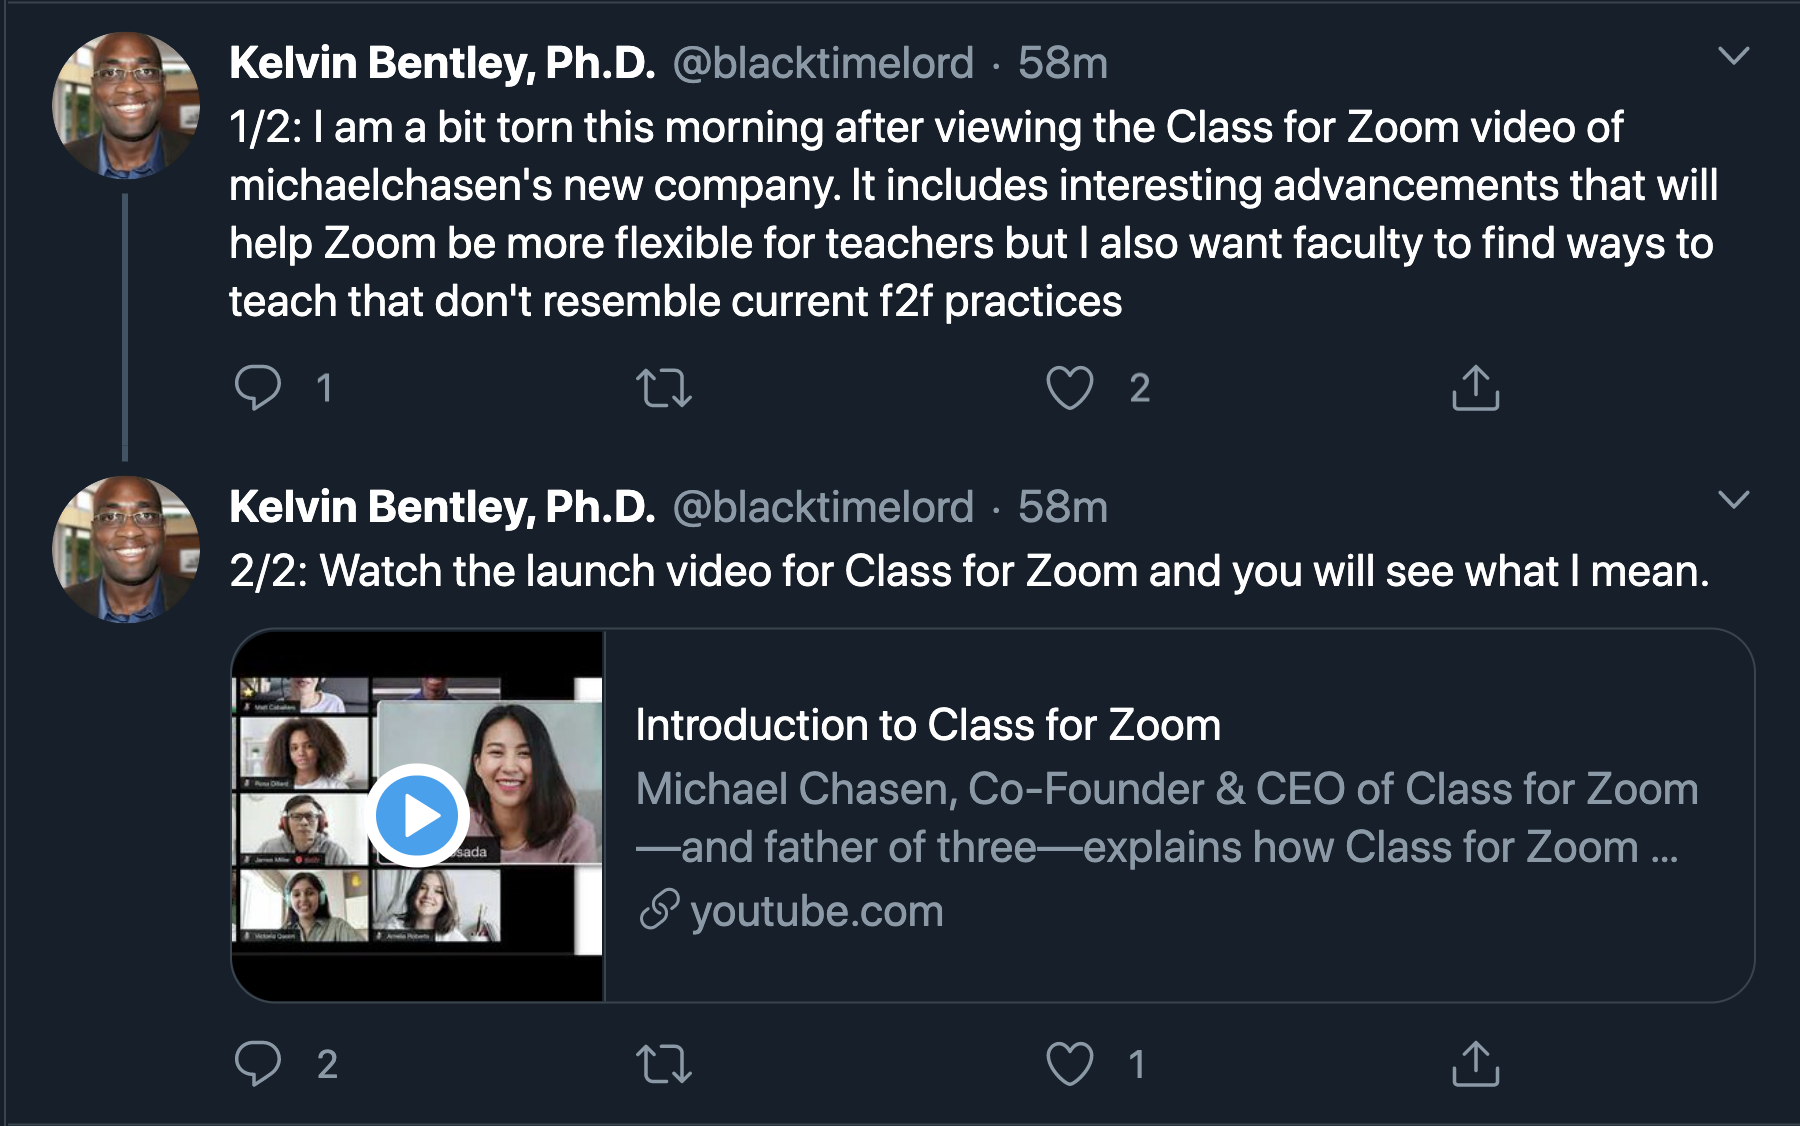 Kelvin Bentley, Ph.D. "I am a bit torn this morning after viewing the Class for Zoom video of Michael Chasen's new company. It includes intereting advancements that will help Zoom be more flexible for teachers but I also want faculty to find ways to teach that don't resemble current face-to-face practices. Watch the launch video for Class for Zoom and you will see what I mean."